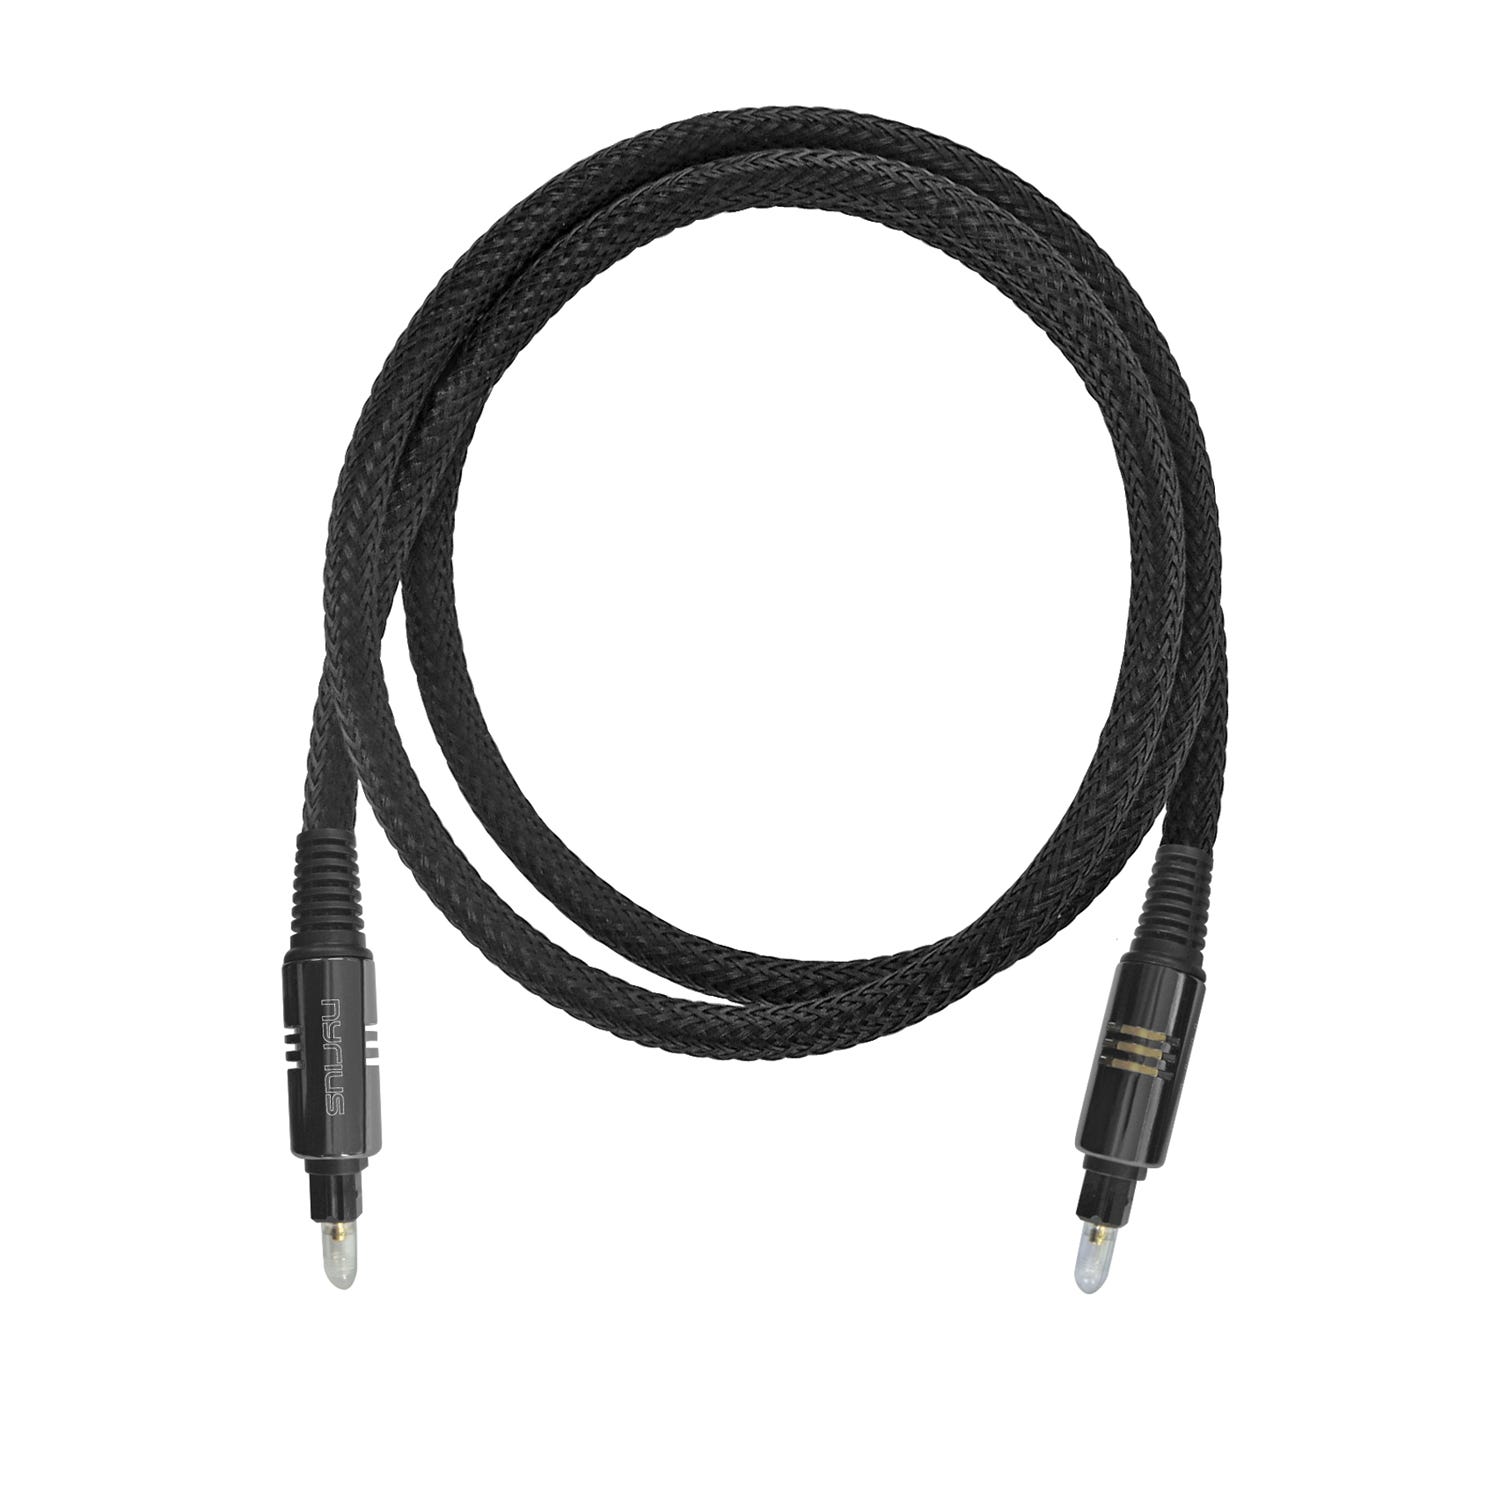 Digital Audio Optical Toslink Cable 6’